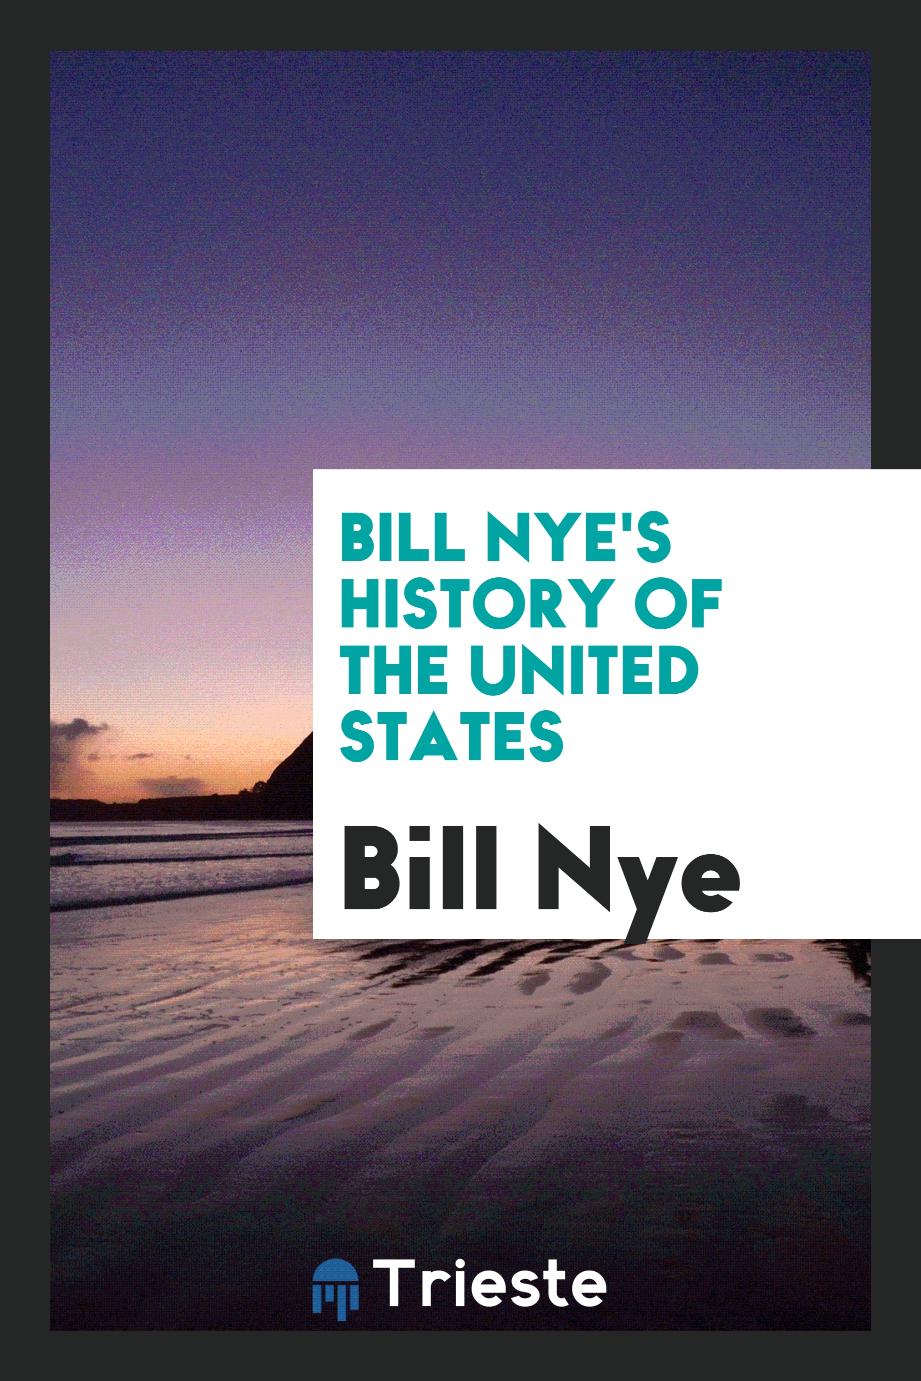 Bill Nye's History of the United States